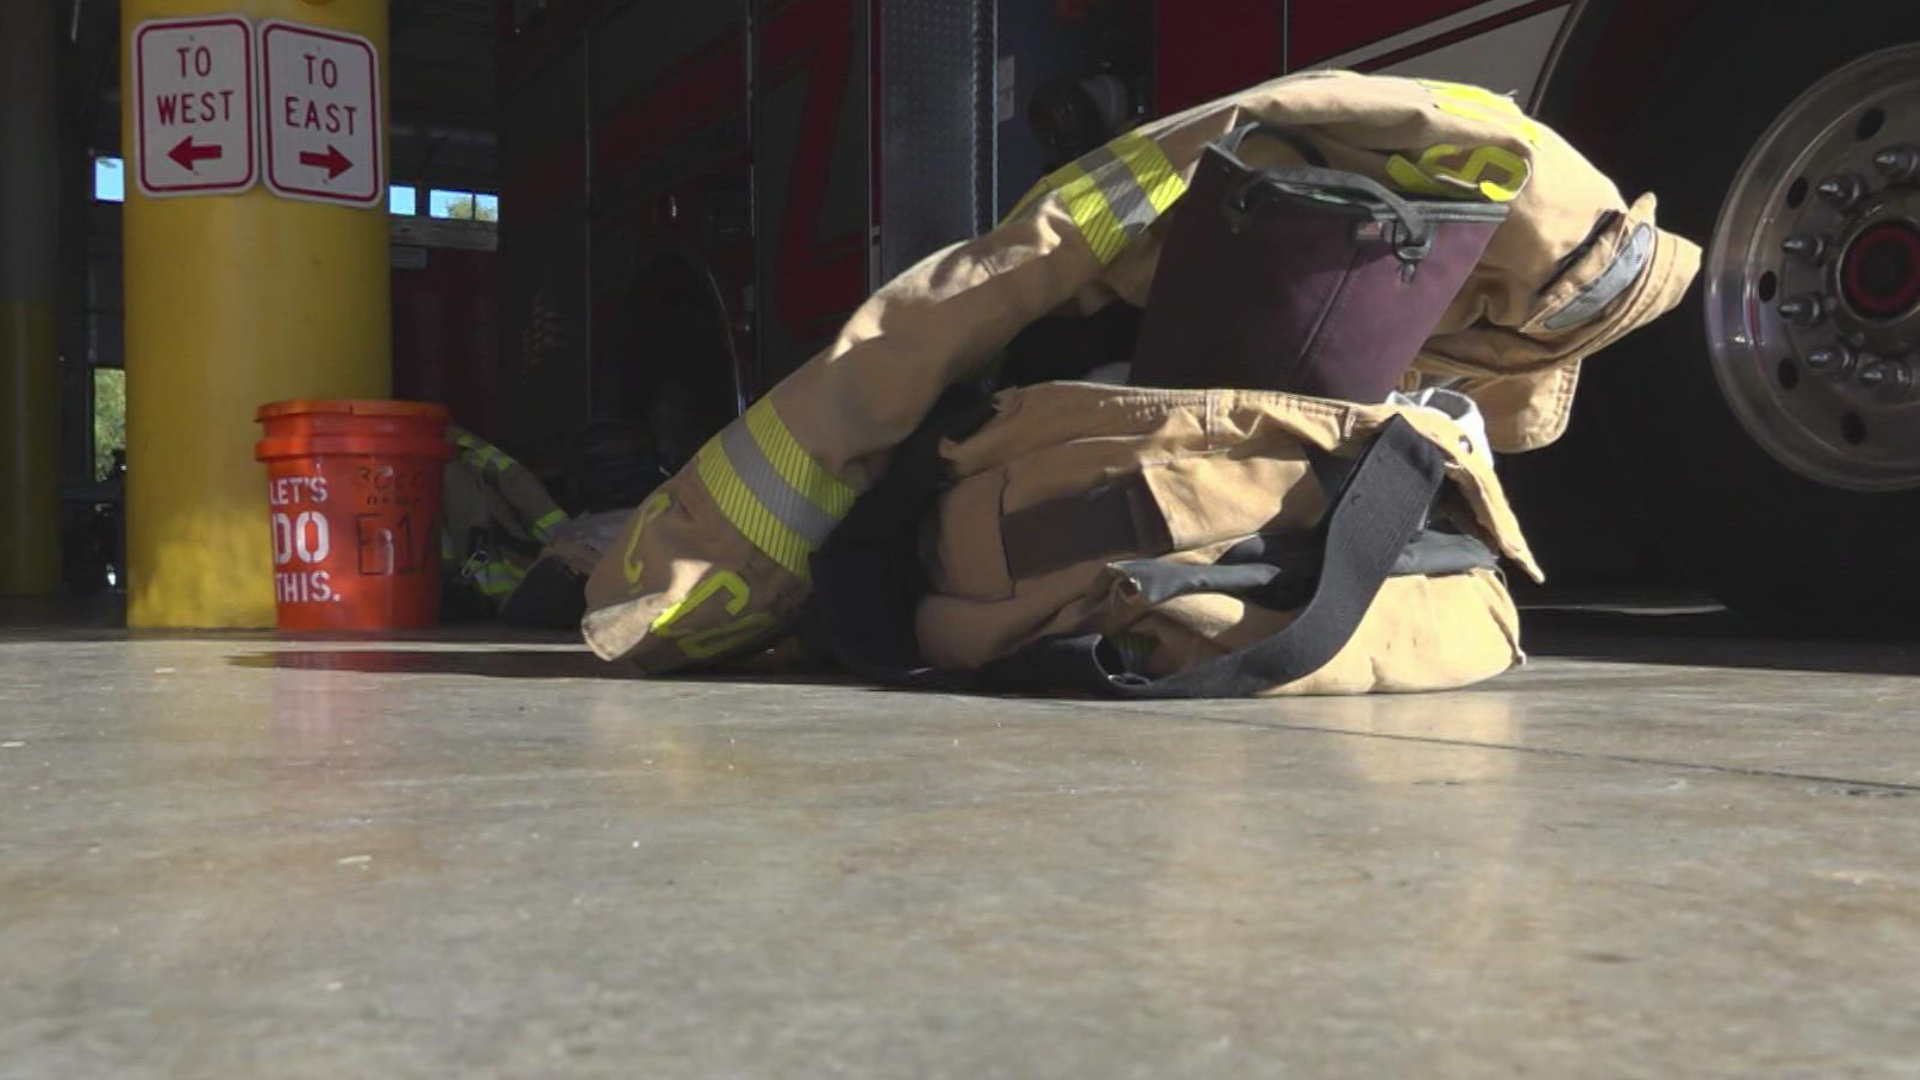 The Madison Fire Department is looking to hire more firefighters and paramedics.